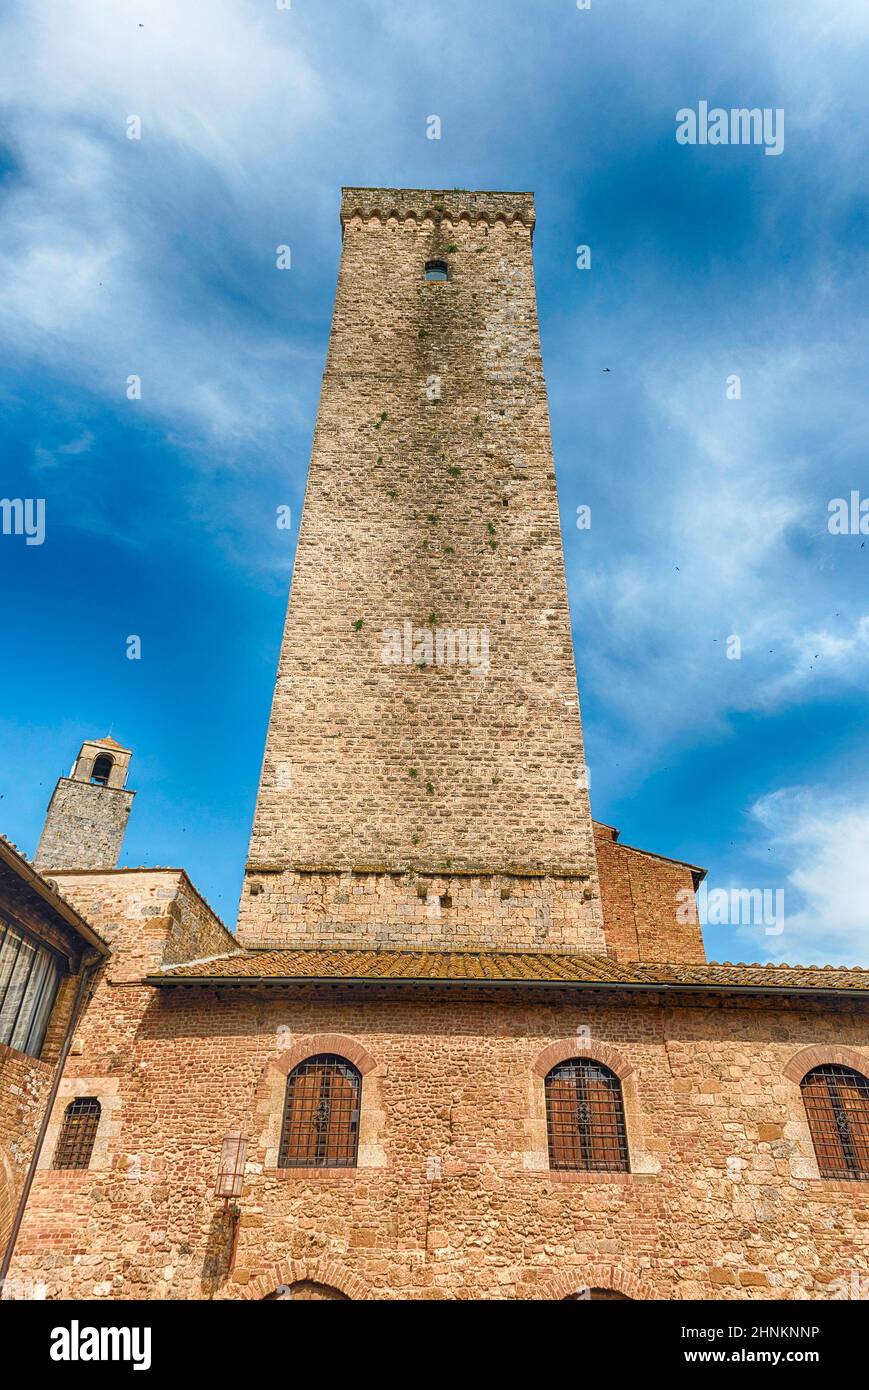 View of Torre Grossa, tallest tower in San Gimignano, Italy Stock Photo